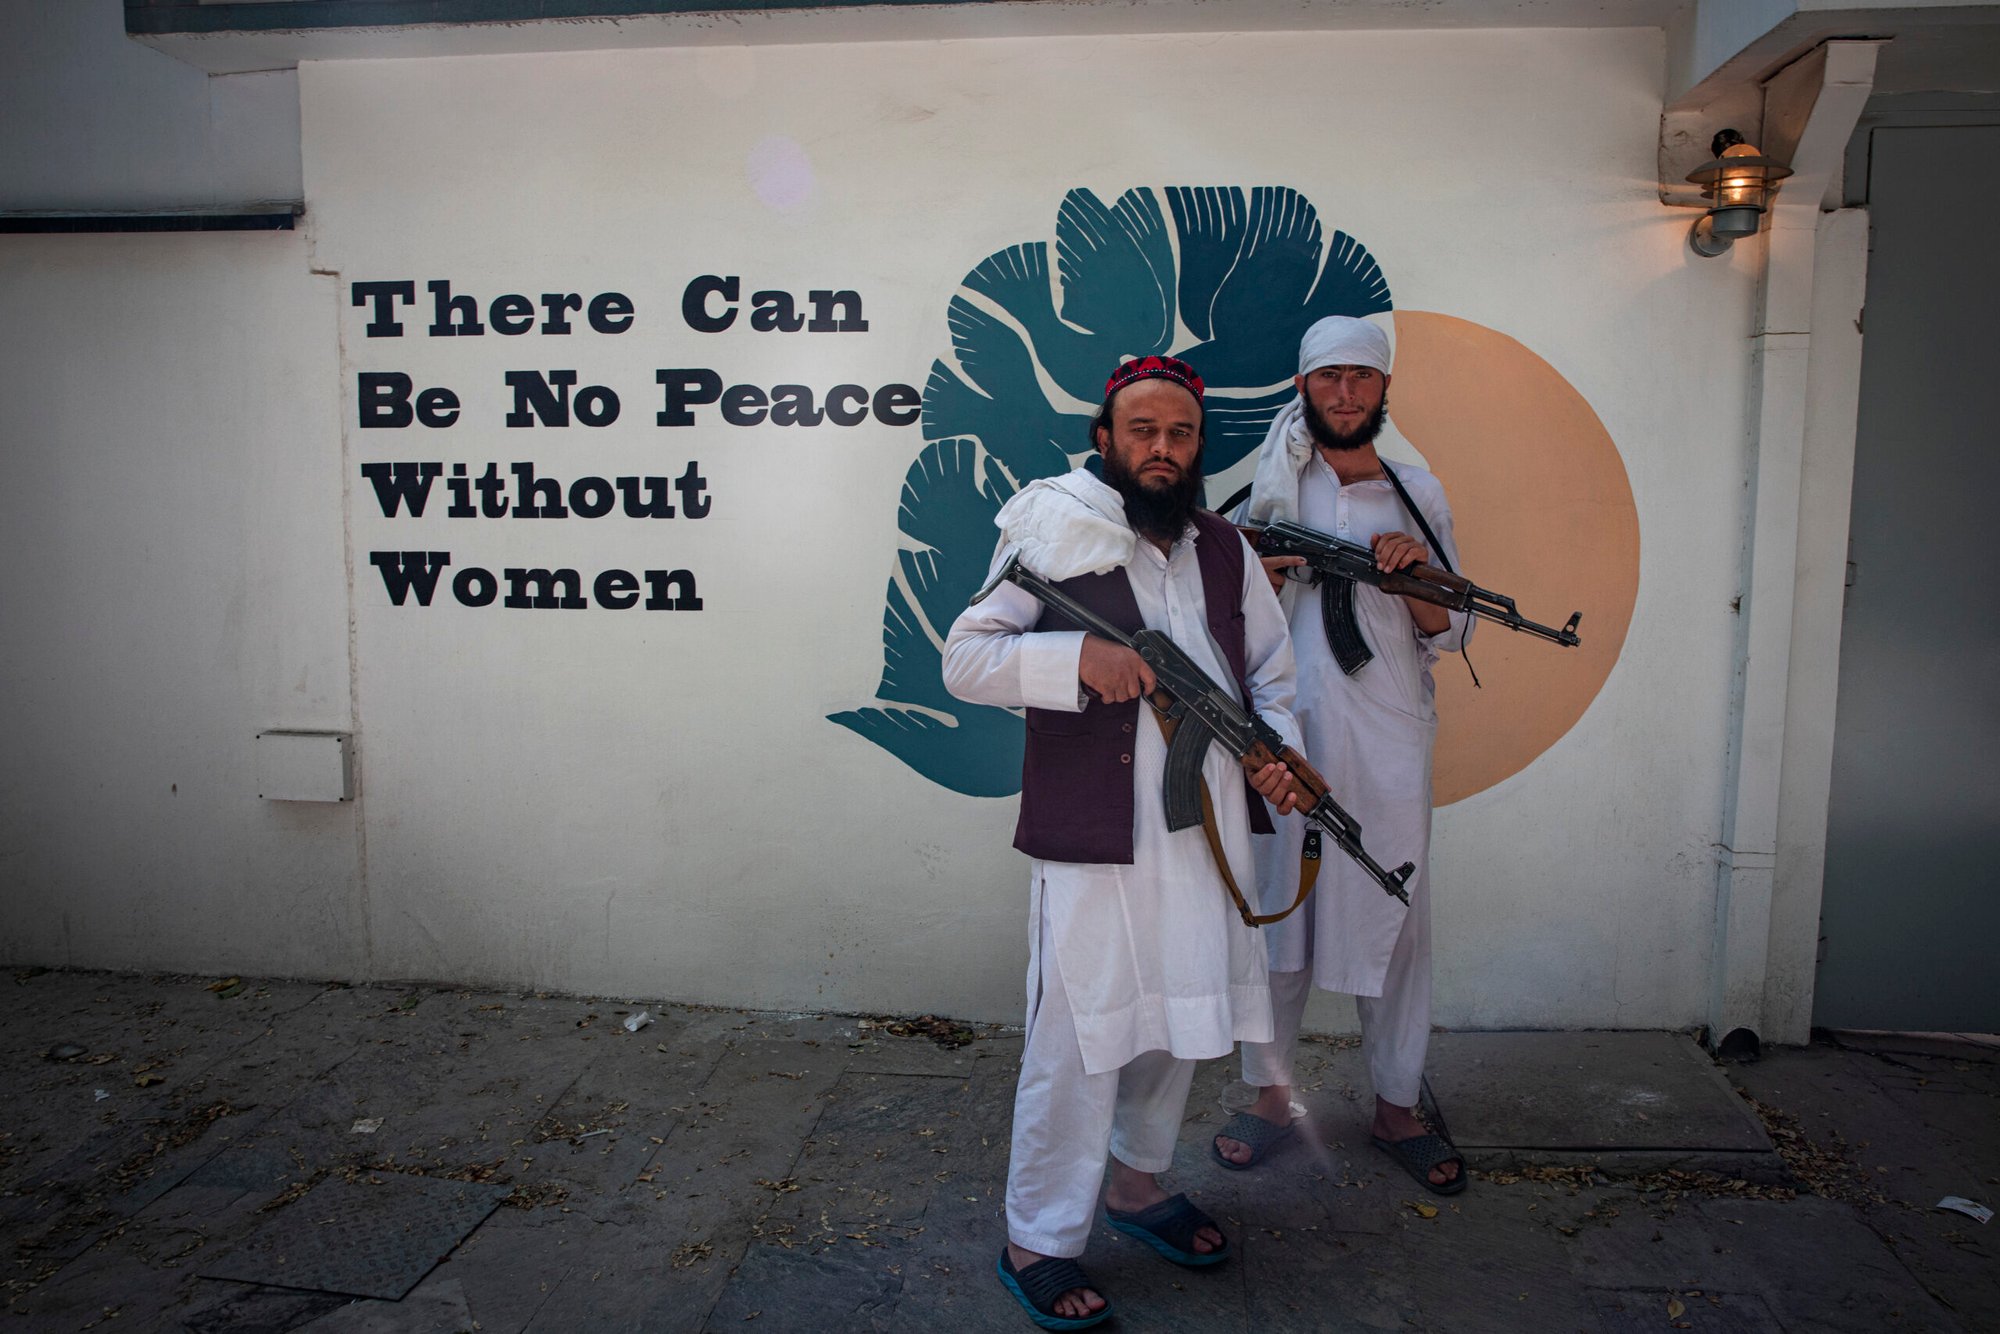 Taliban fighters pose to the camera beside a “There can be no peace without women” graffiti written on the wall of Norwegian embassy in Kabul, Afghanistan.